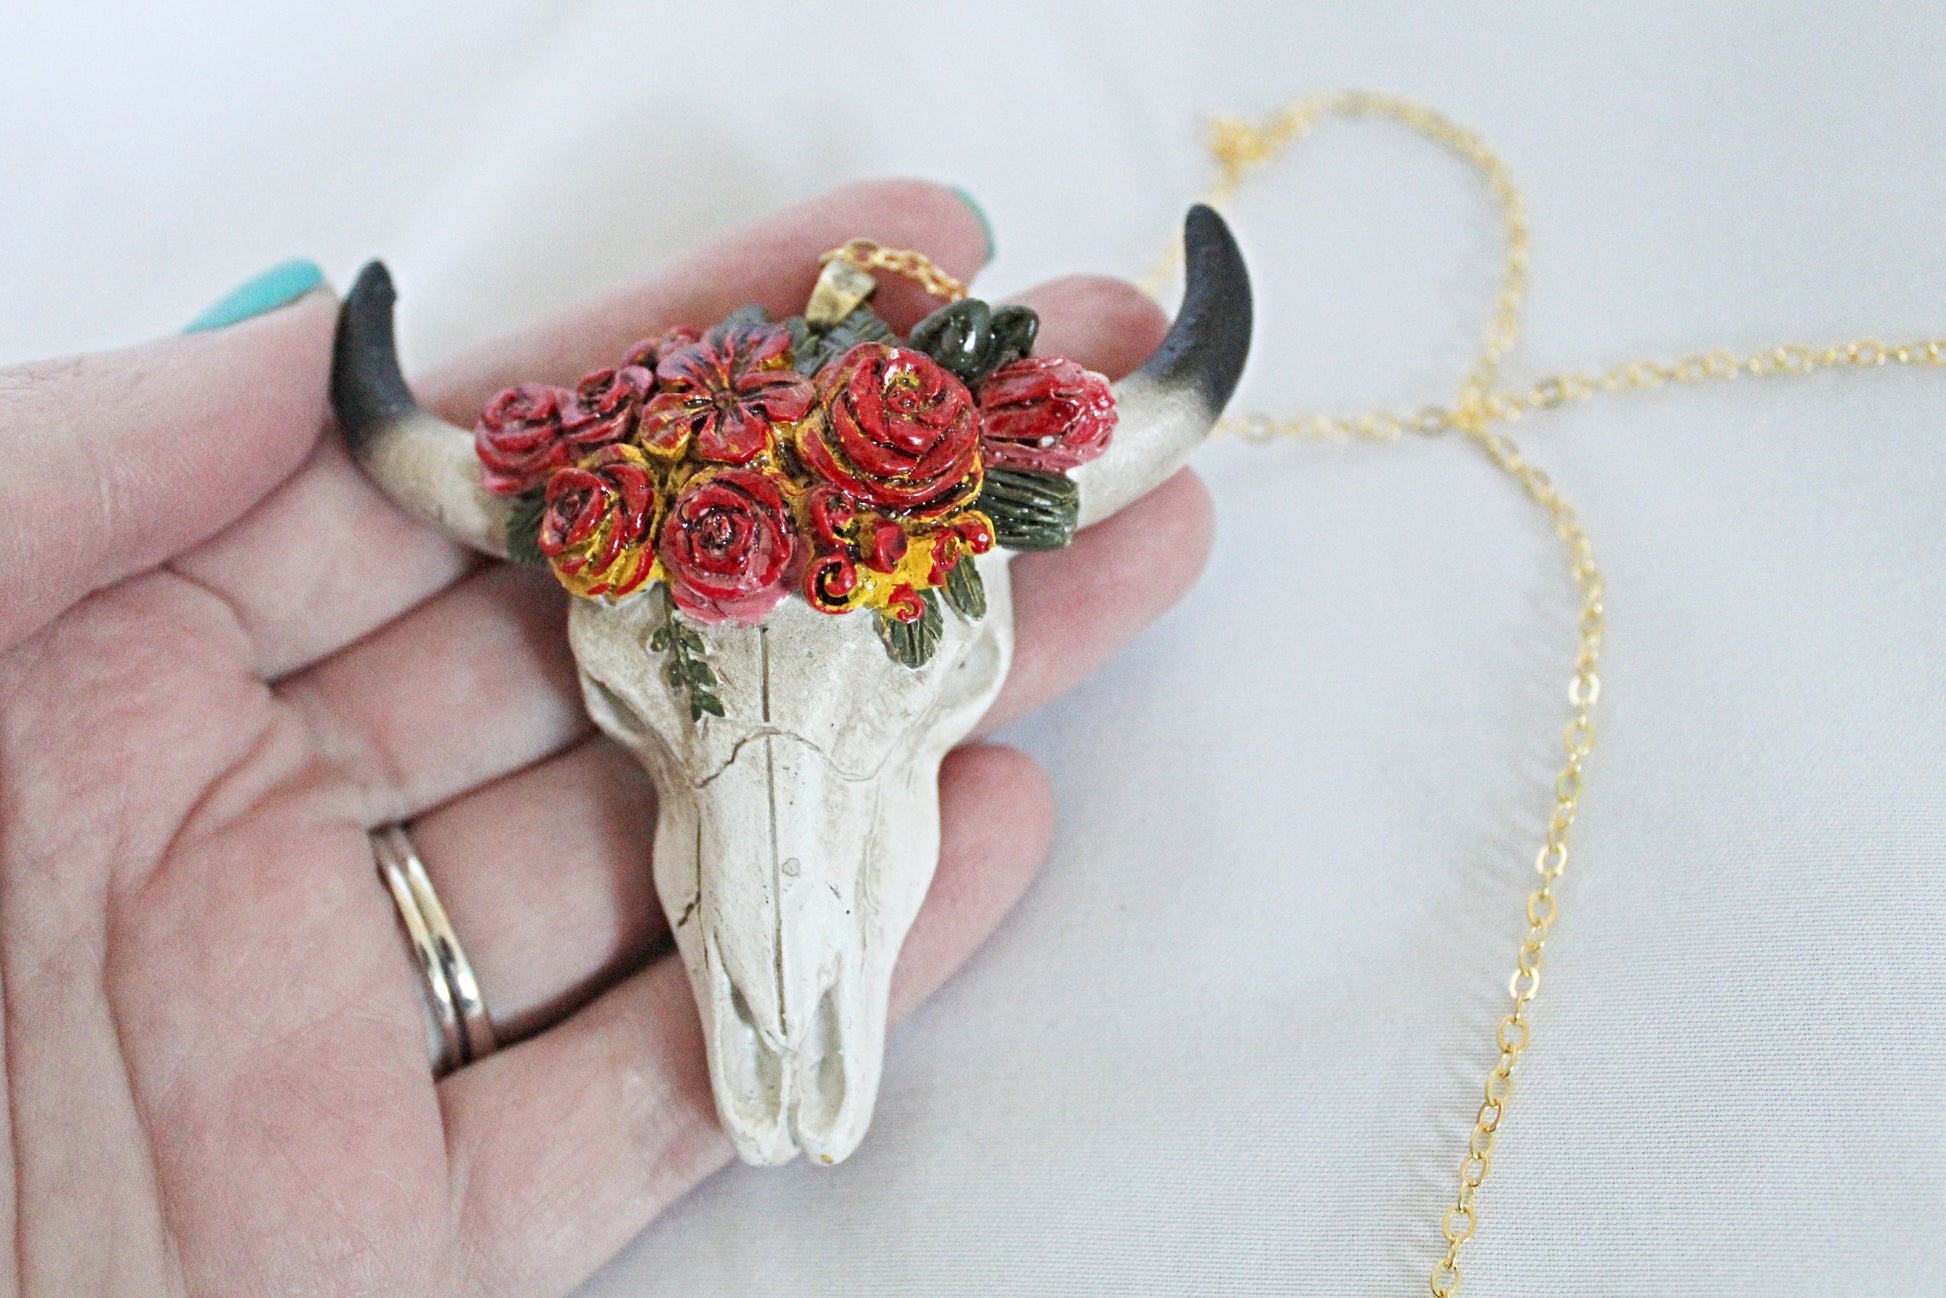 Large Floral Bull Skull Necklace - Wildflower Moon Magic